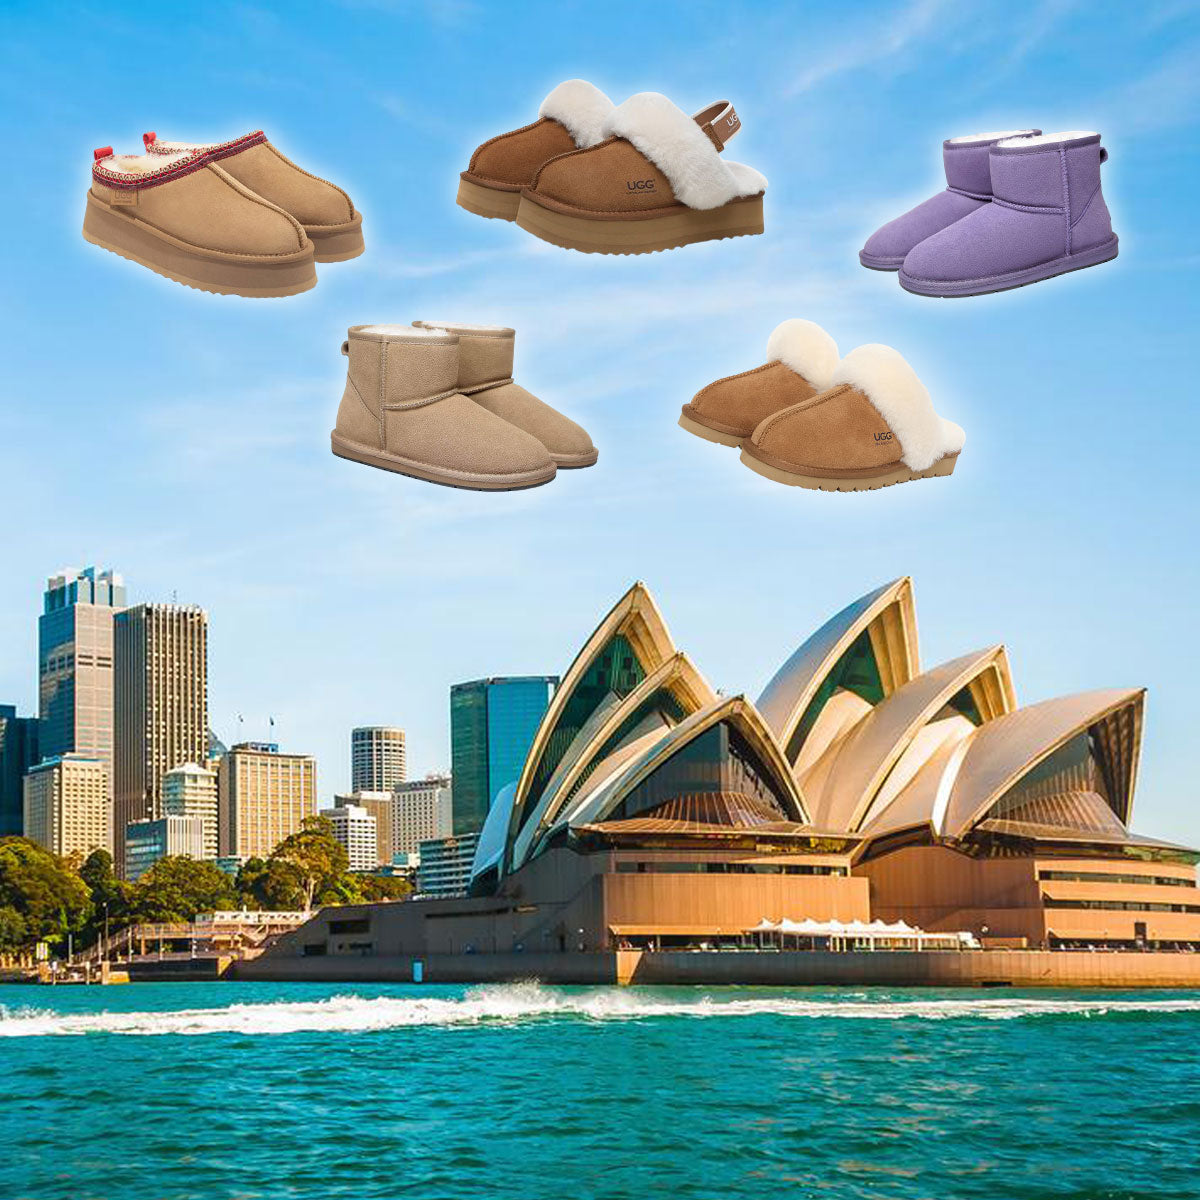 Fashion Trends and Fashion History of Sydney